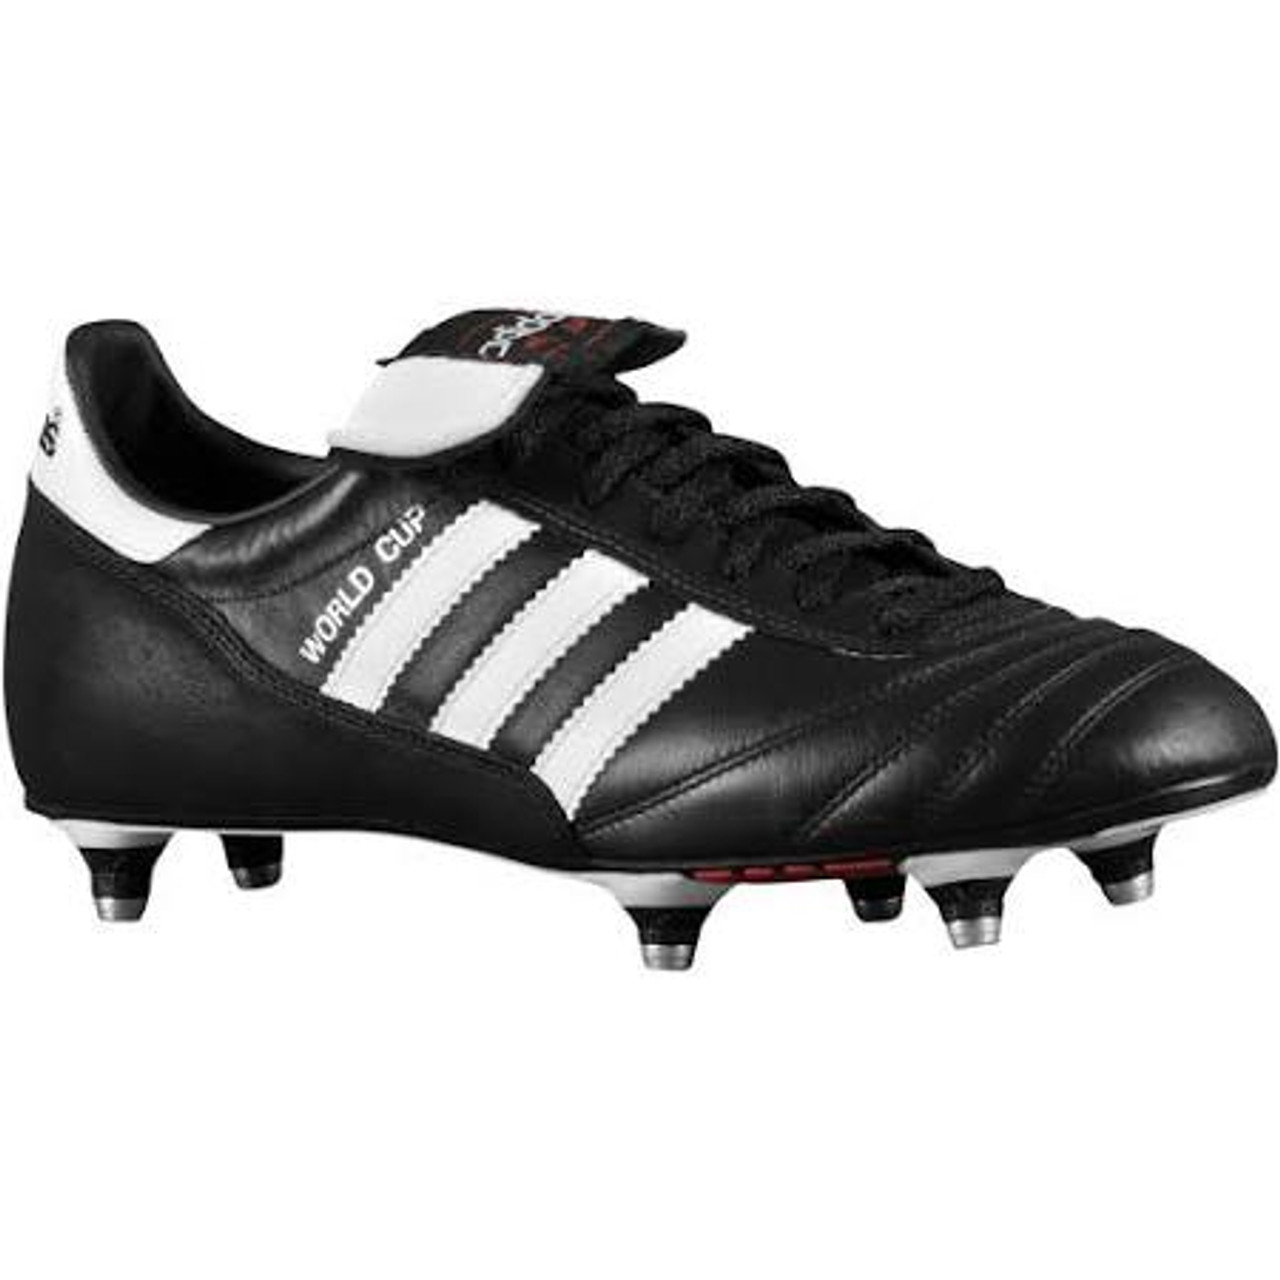 adidas world cup edition shoes